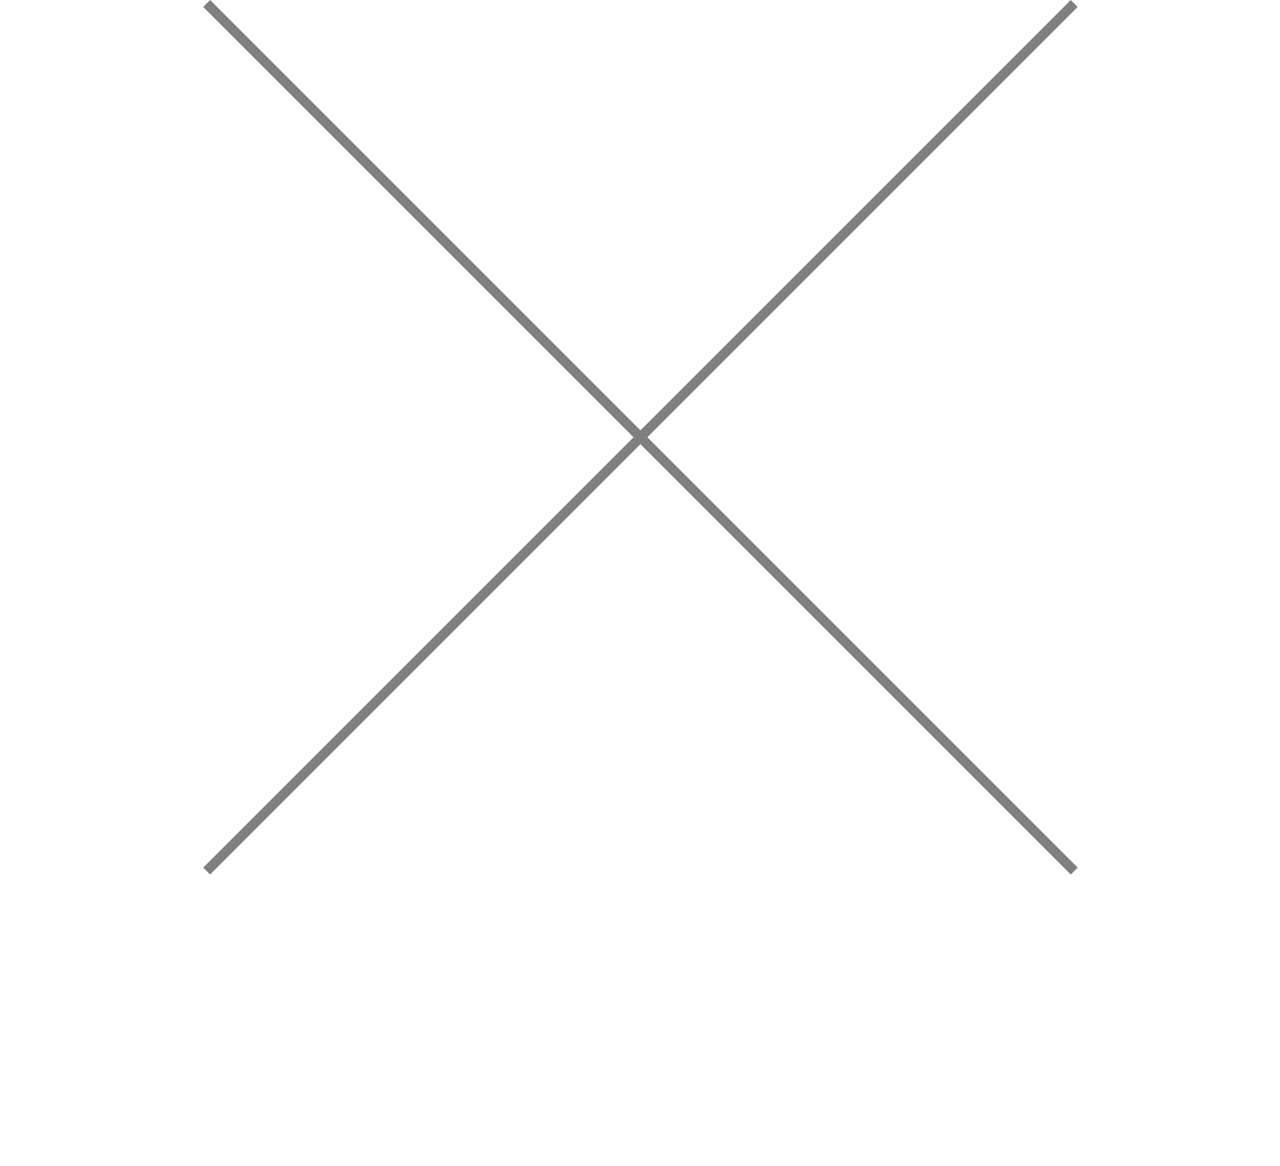 $ynfull Record$'s web page